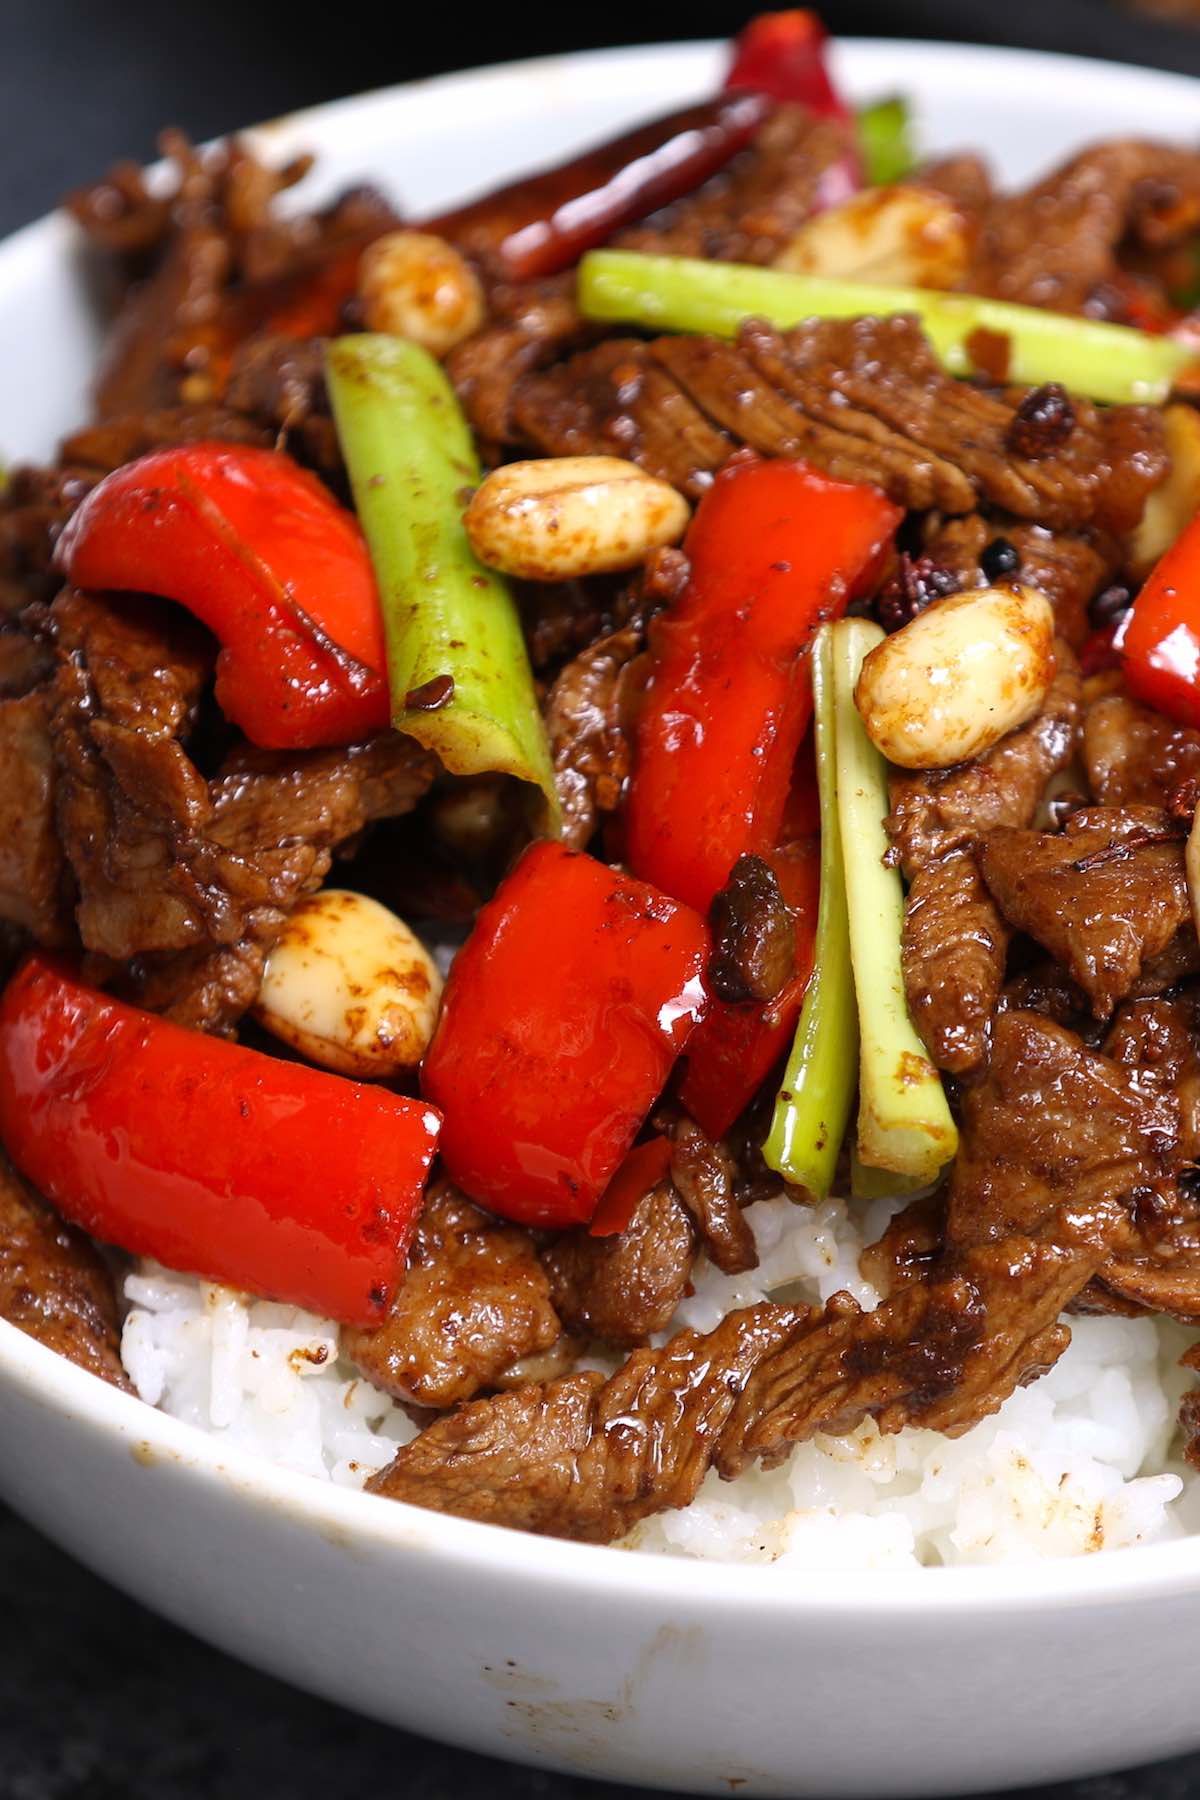 Rice bowl with stir fried beef